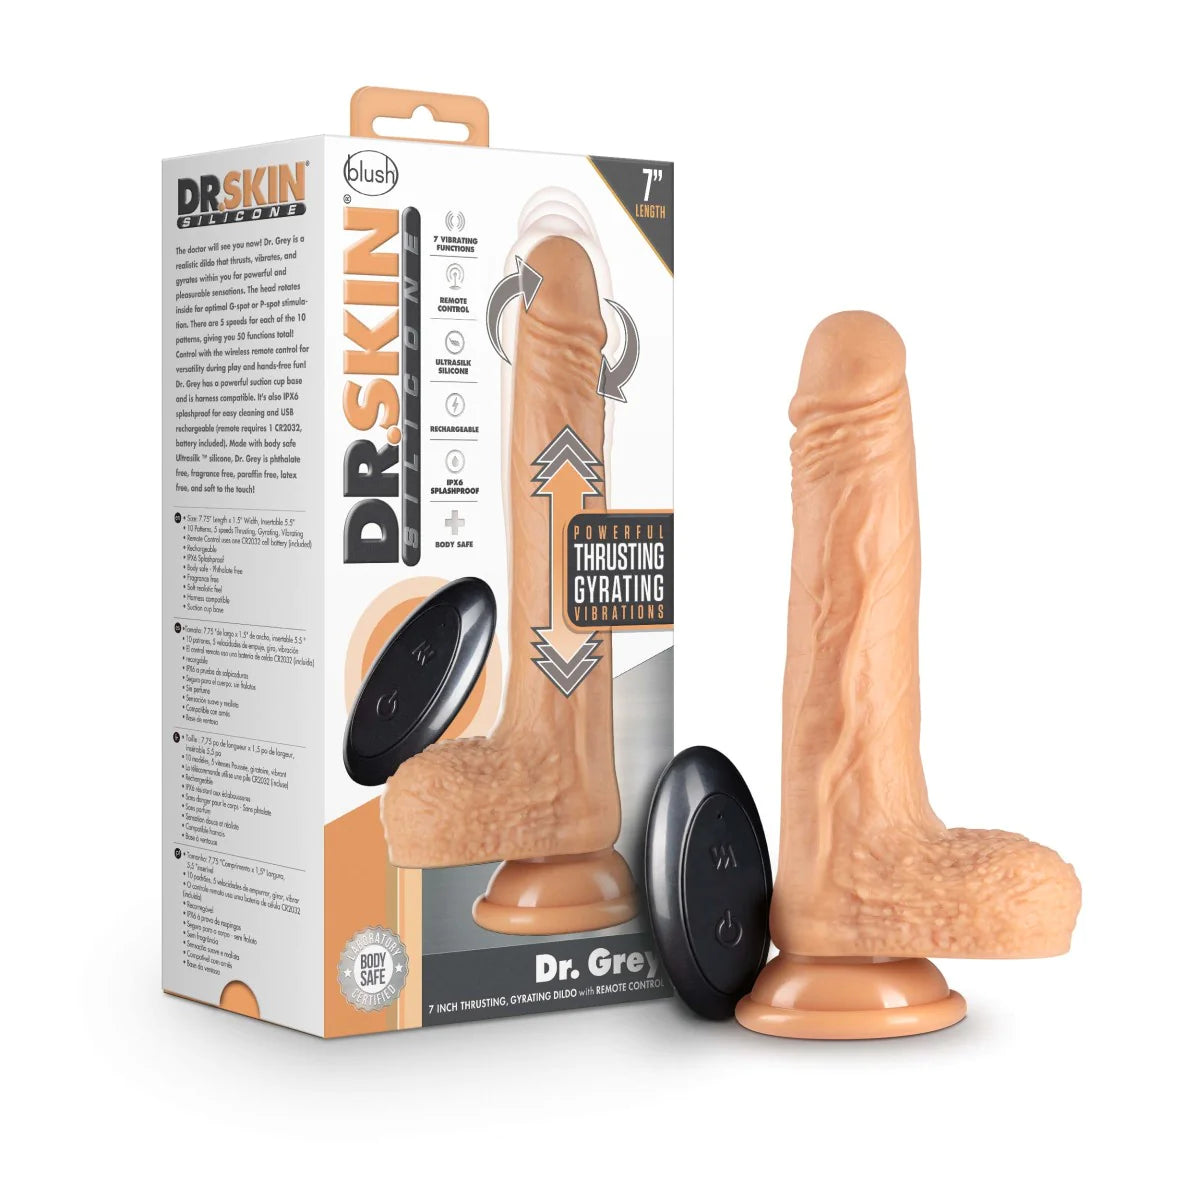 Dr. Skin Silicone Dr. Grey 7.75-Inch Long Rechargeable Thrusting & Vibrating Dildo With Suction Cup Base